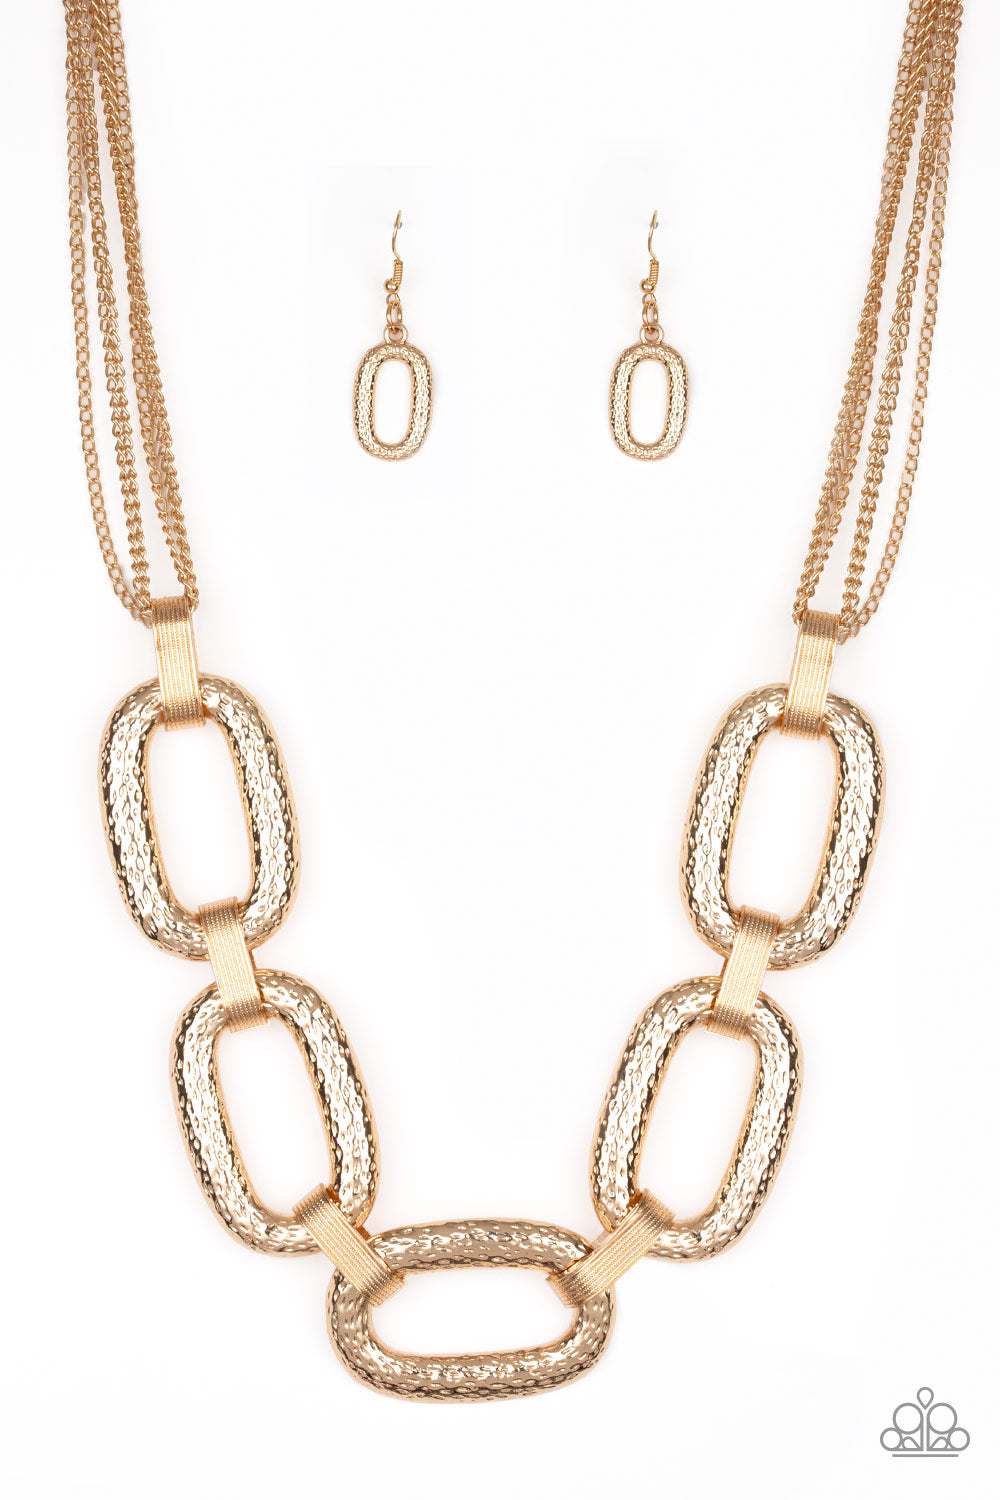 Take Charge Gold Paparazzi Necklace Cashmere Pink Jewels - Cashmere Pink Jewels & Accessories, Cashmere Pink Jewels & Accessories - Paparazzi